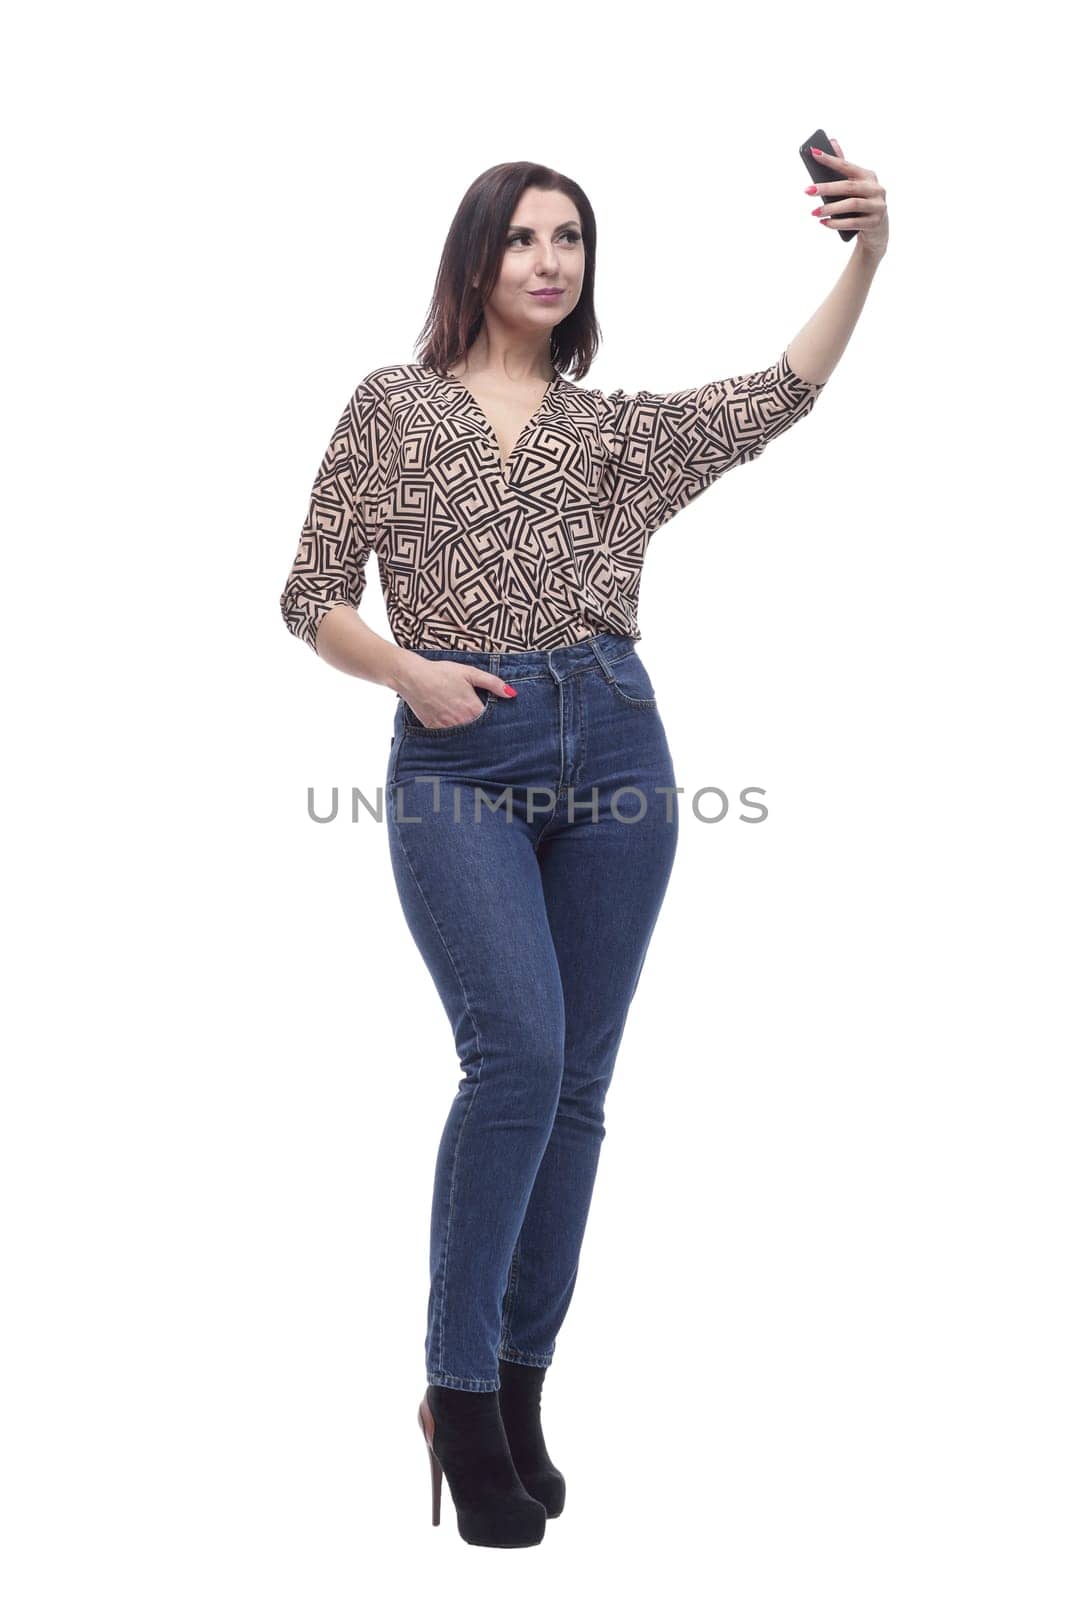 in full growth. attractive young woman with a smartphone. isolated on a white background.